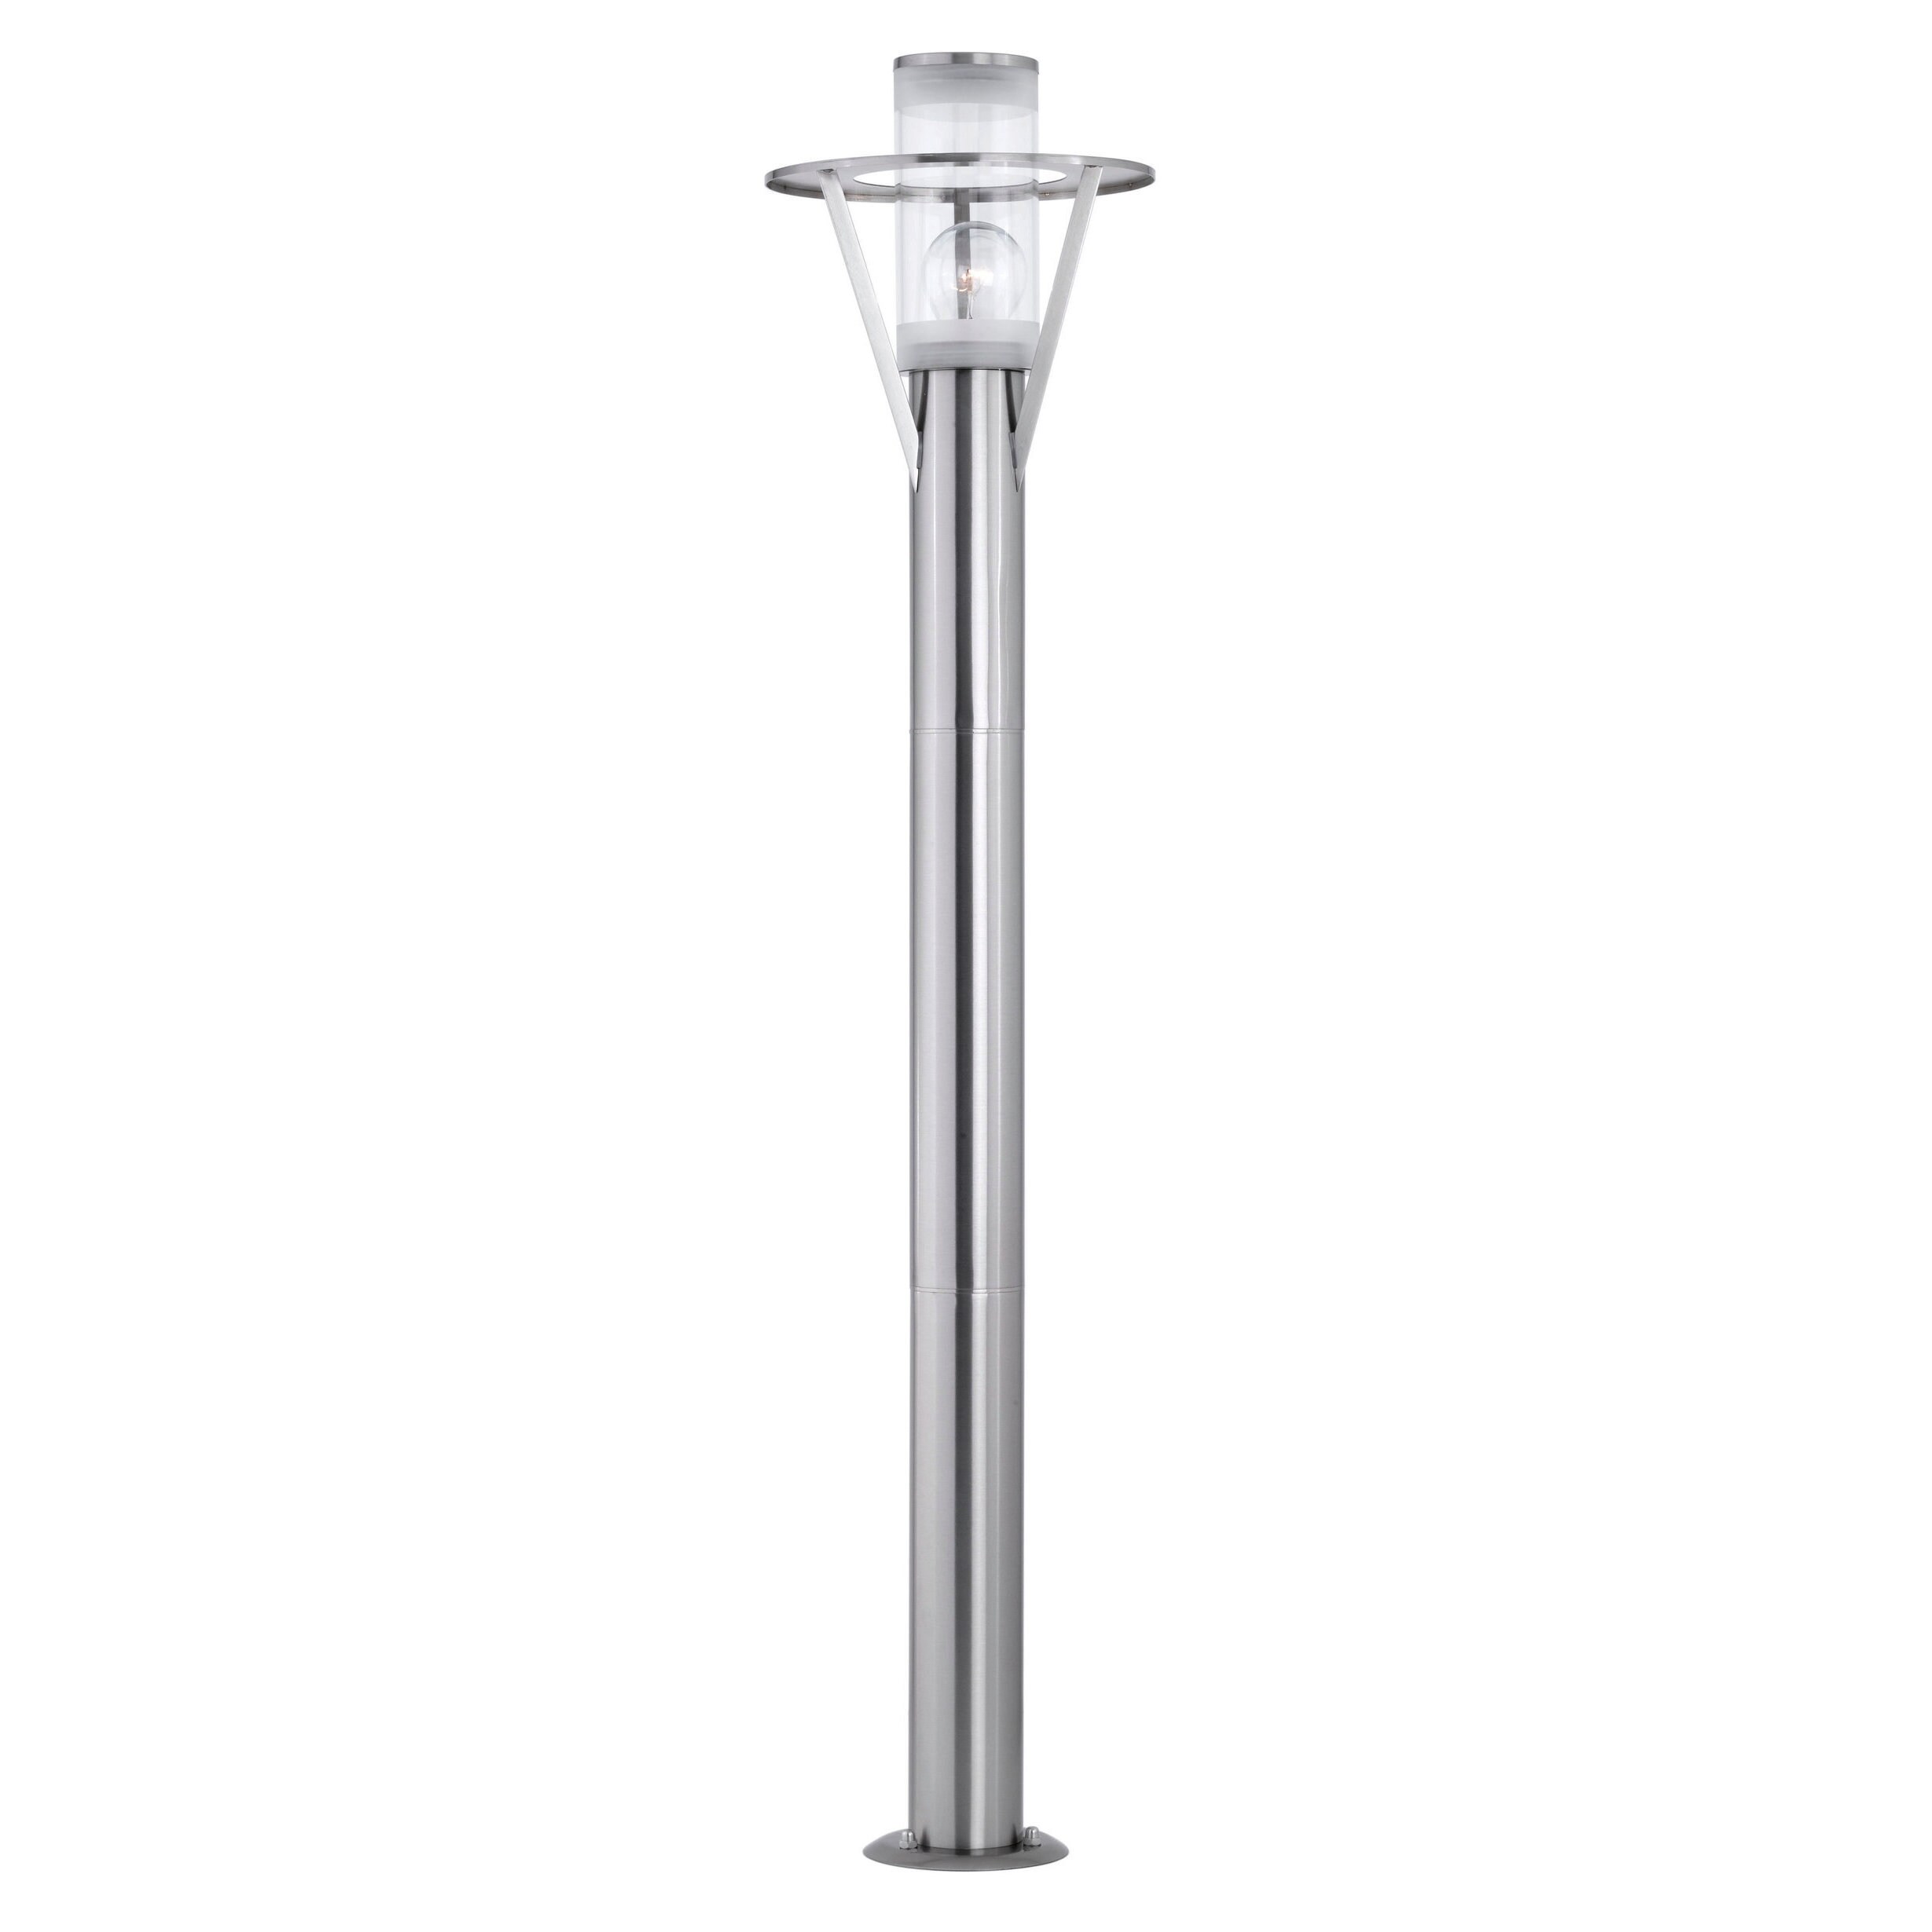 Eglo Belfast 1-light Stainless Steel Outdoor Post Light with Clear Glass